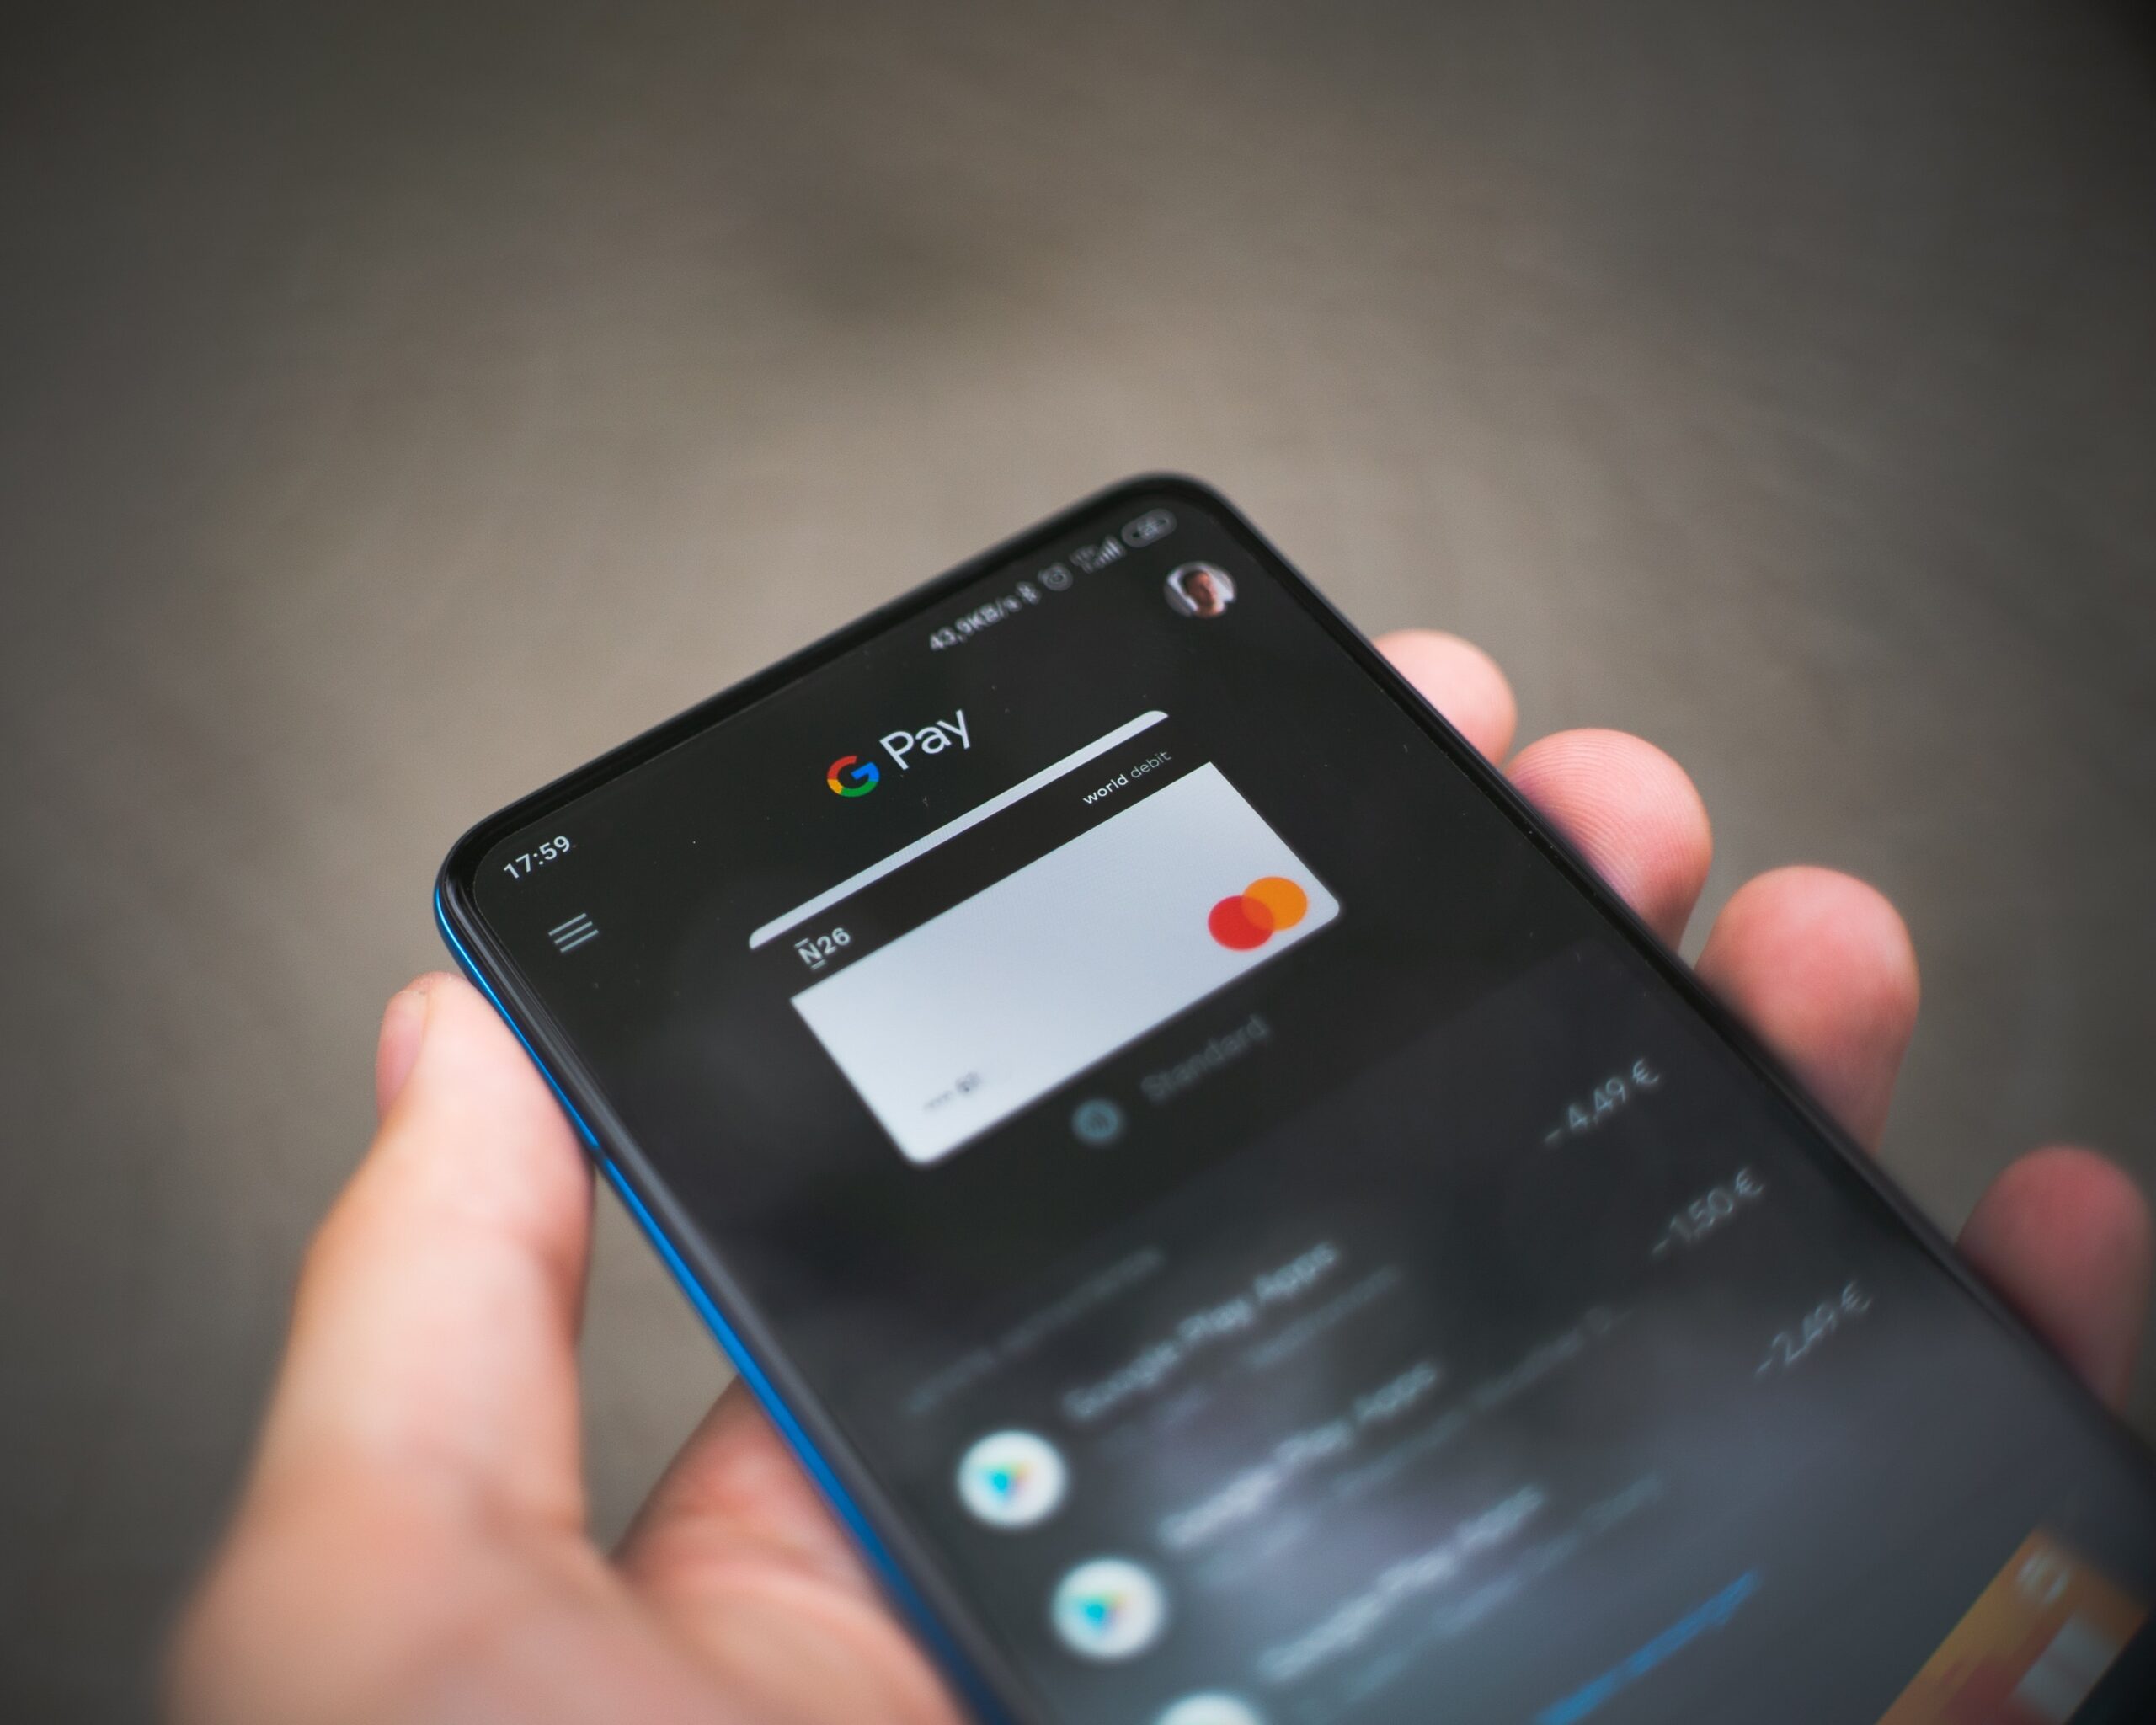 Computer repairs blog: Google reinvents its Wallet with virtual card